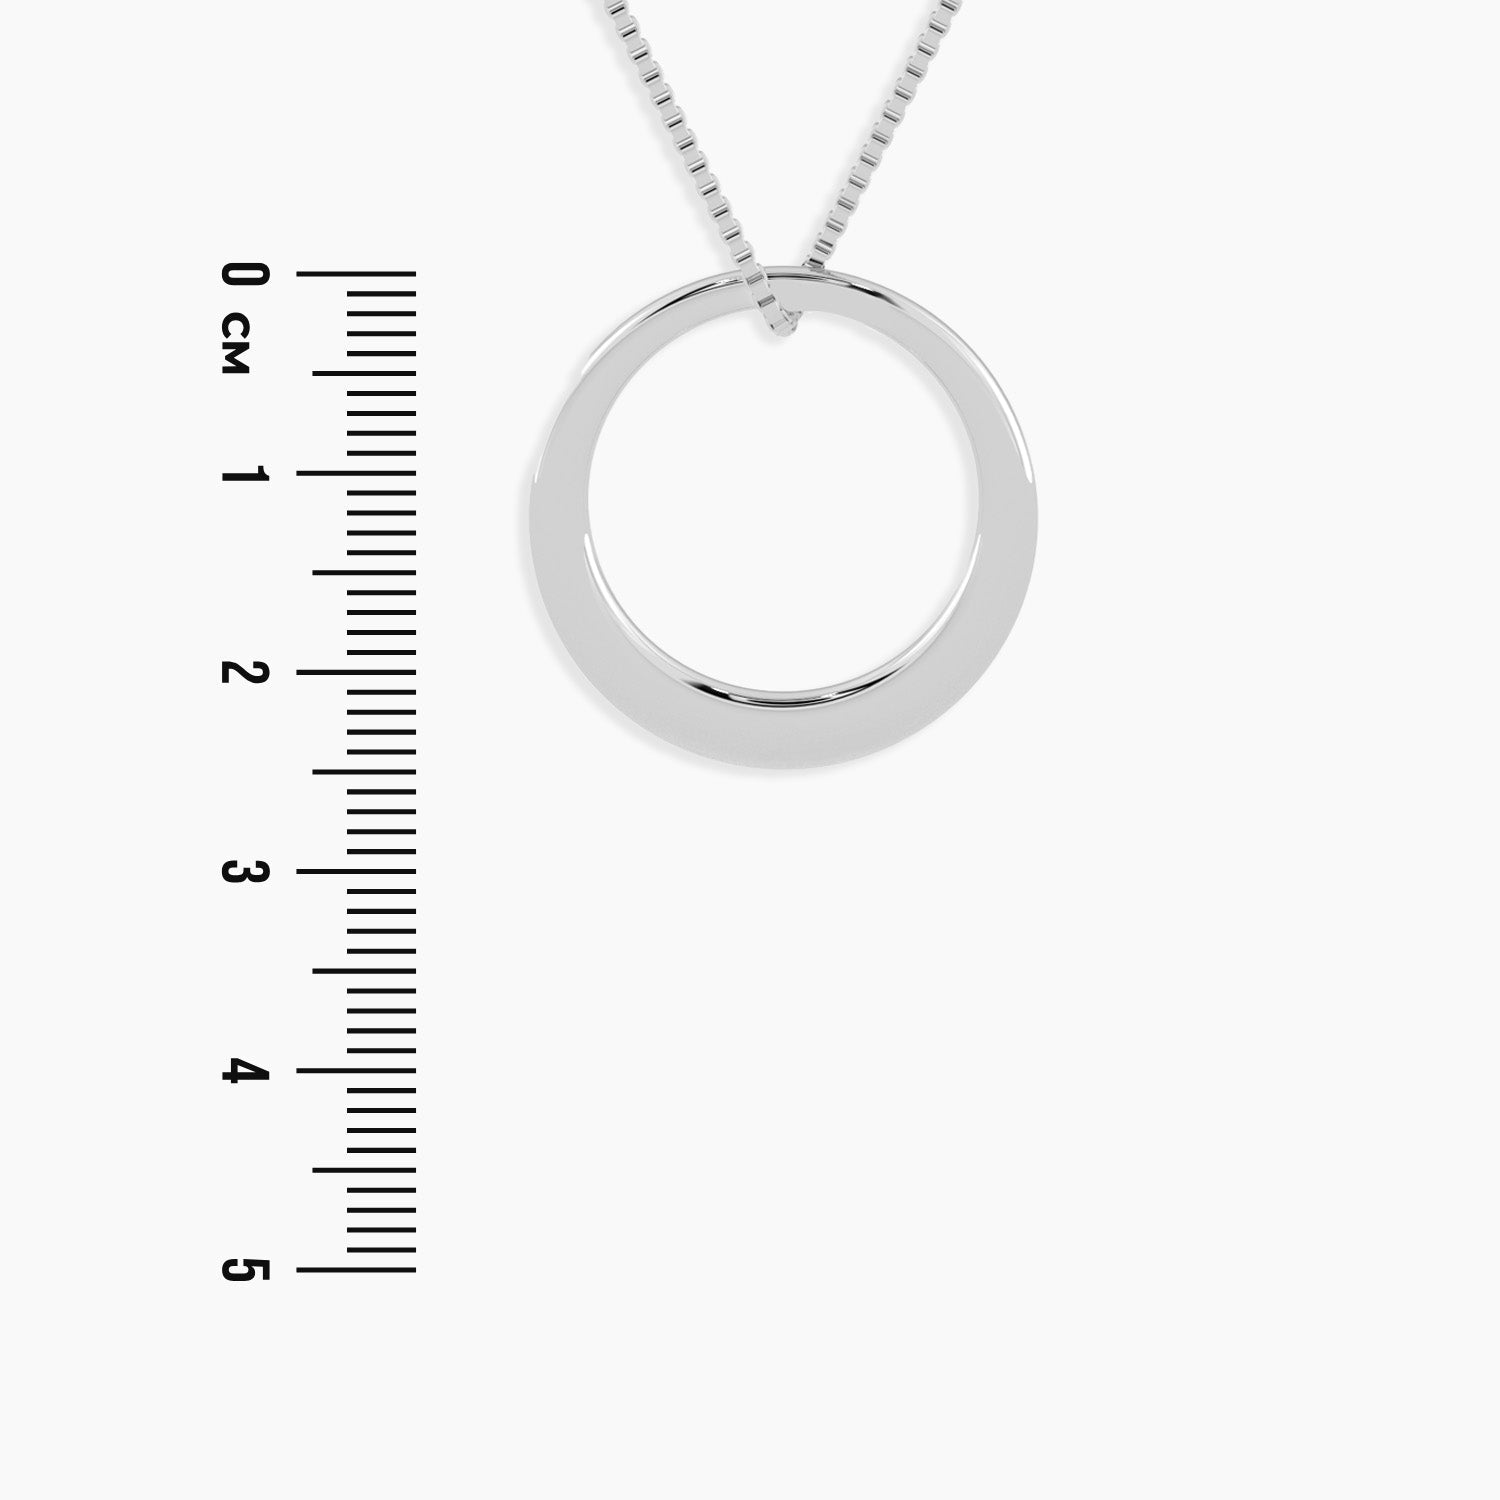 Circle of Serenity Small Pendant displayed next to a scale, offering a clear representation of its compact size and dimensions, ideal for personalized gifts for her in Australia.